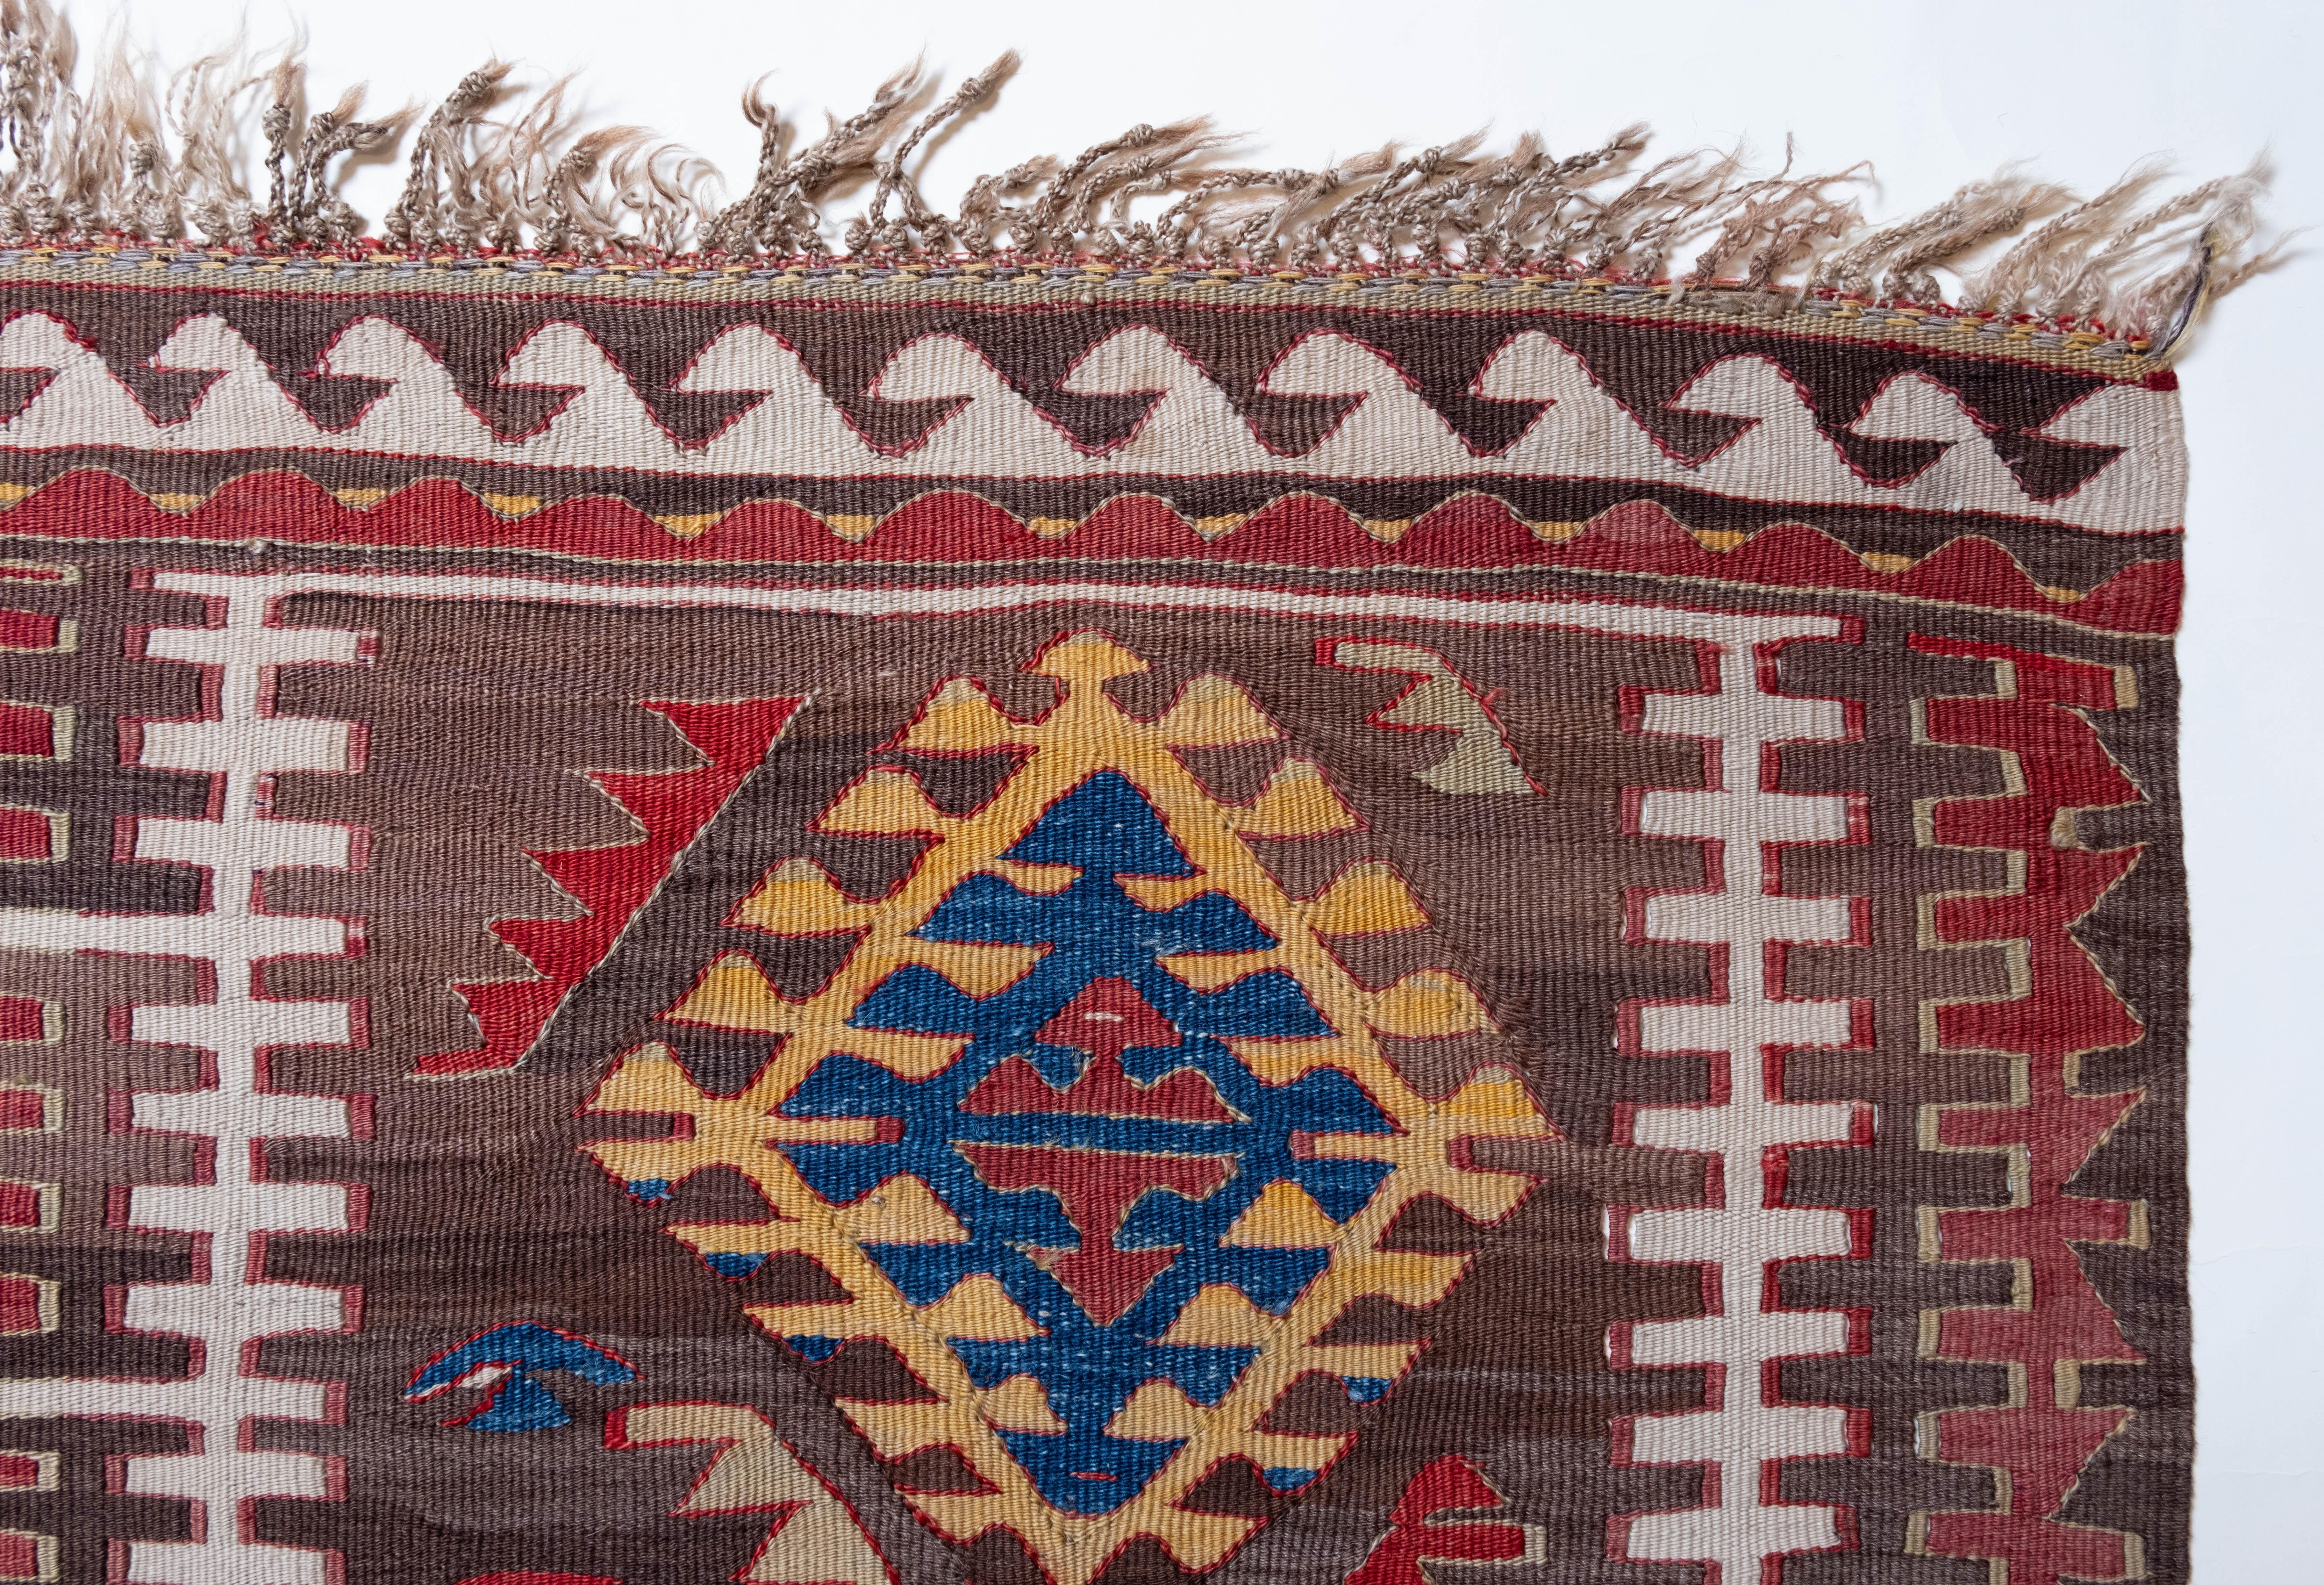 This is Eastern Anatolian Antique Kilim from the Adiyaman region with a rare and beautiful color composition.

This highly collectible antique kilim has wonderful special colors and textures that are typical of an old kilim in good condition. It is